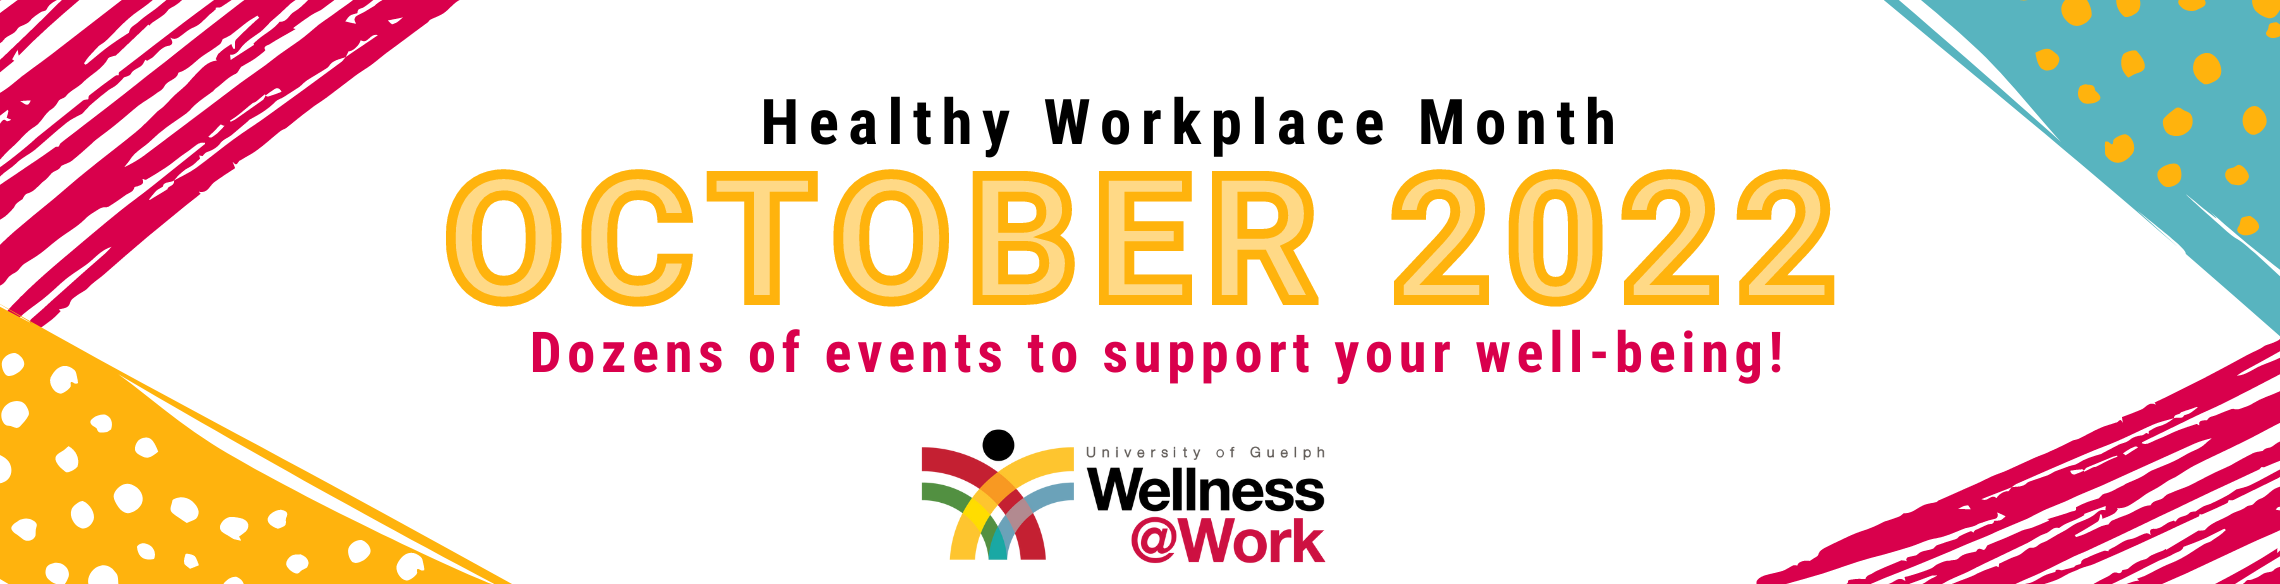 Text reading: Healthy workplace Month, October 2021. Dozens of virtual events!